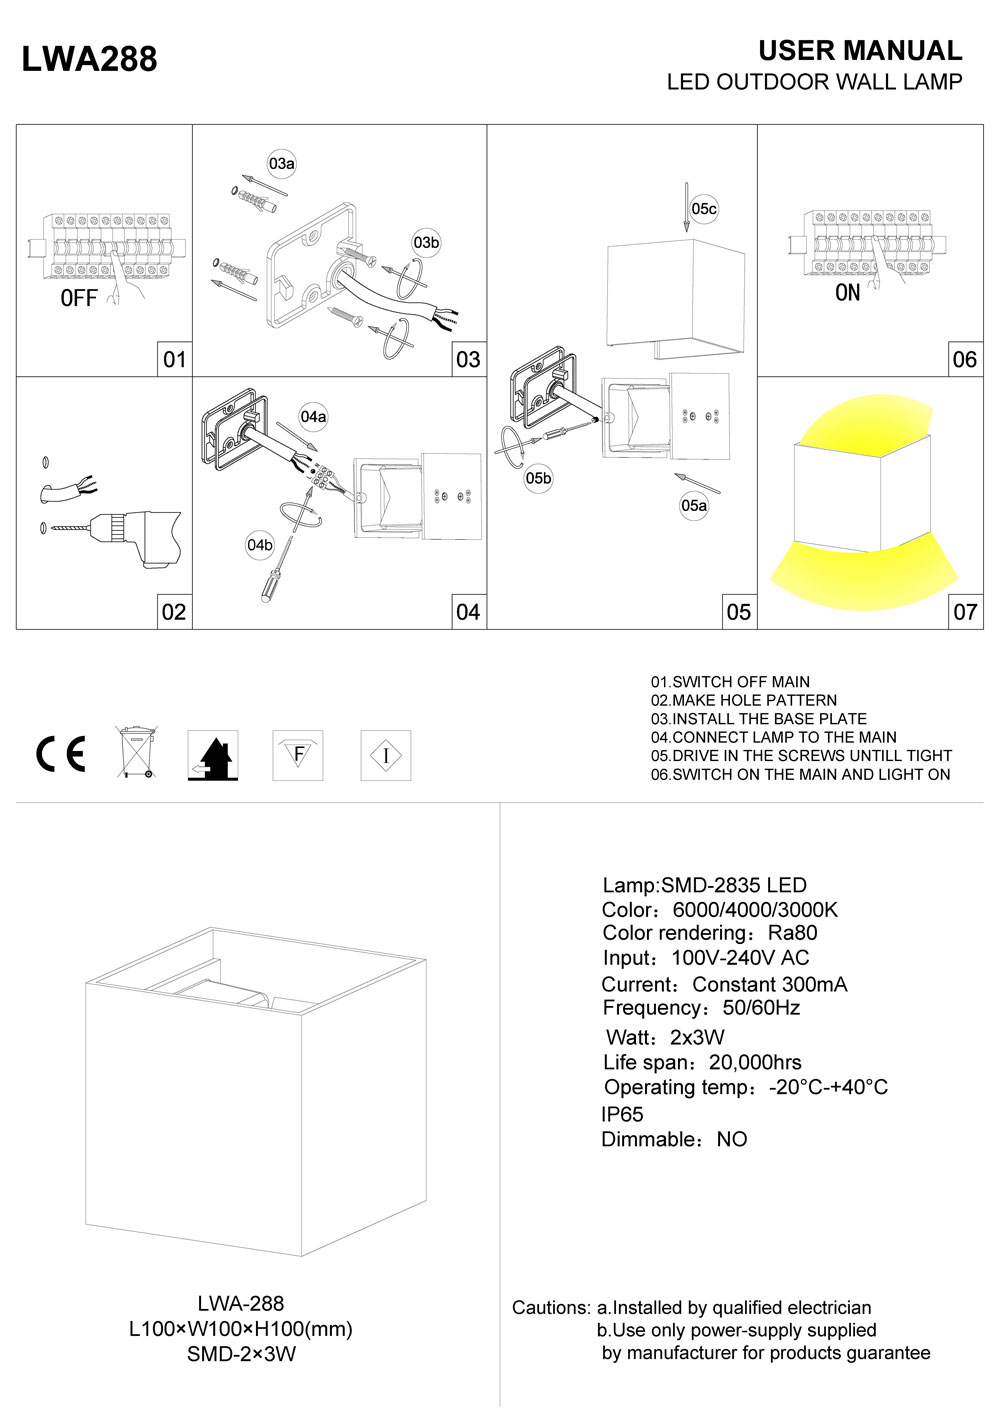 LWA288 up and down garden wall light installation guide